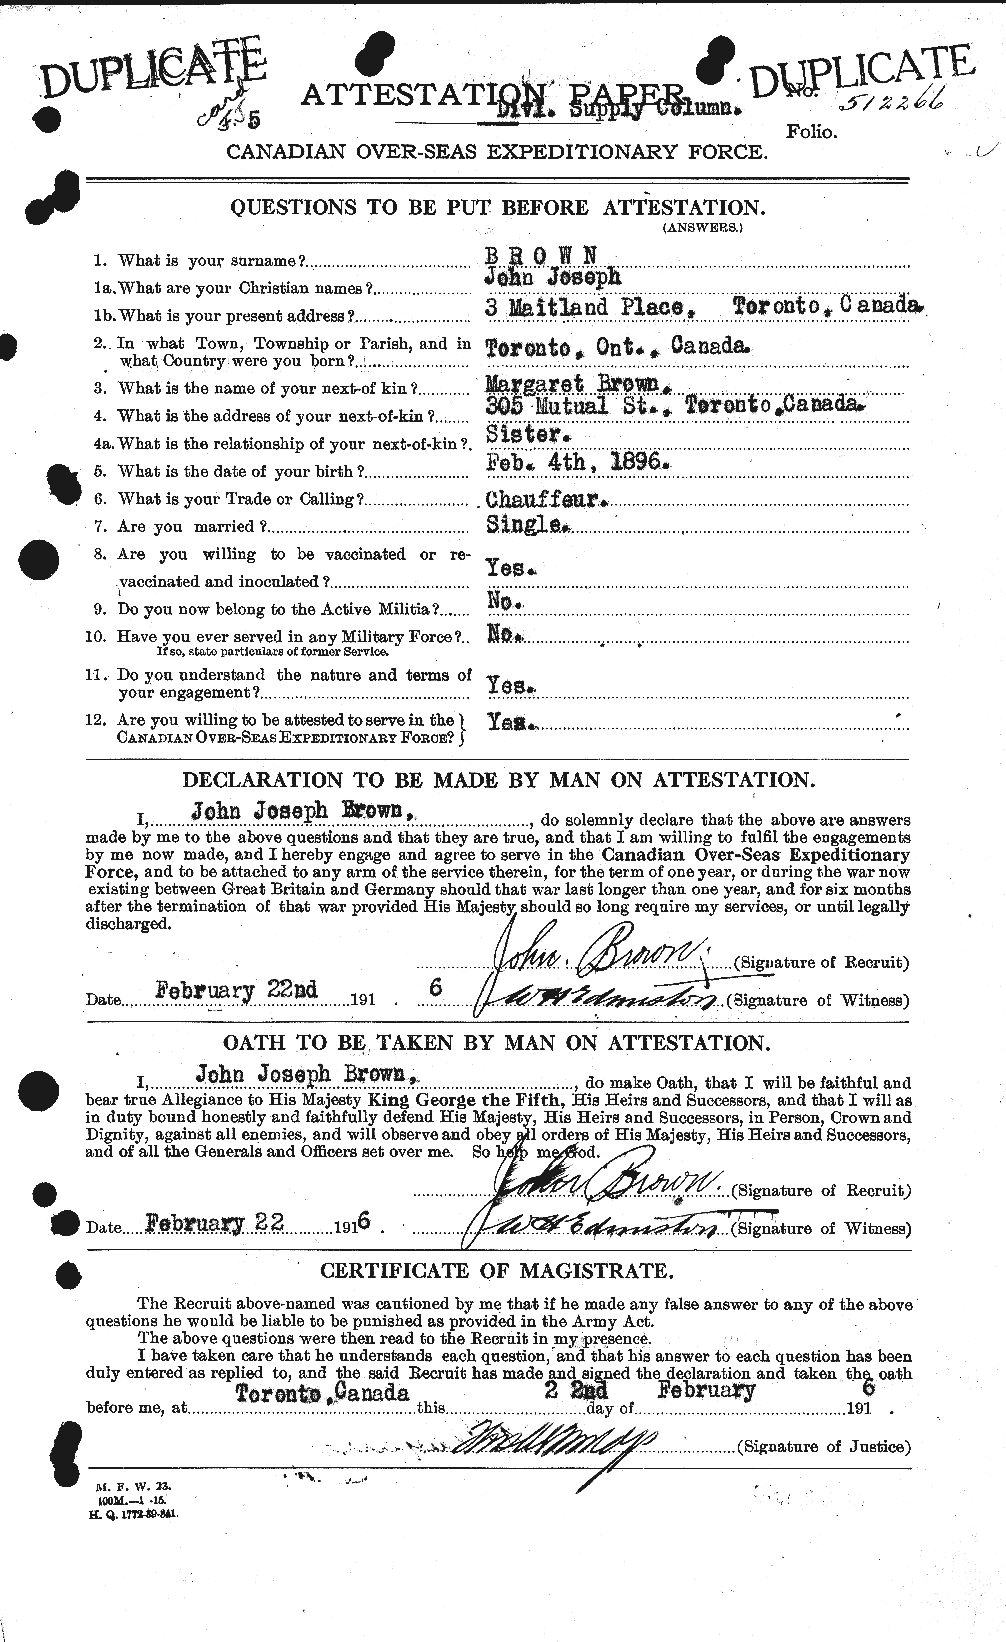 Personnel Records of the First World War - CEF 265821a